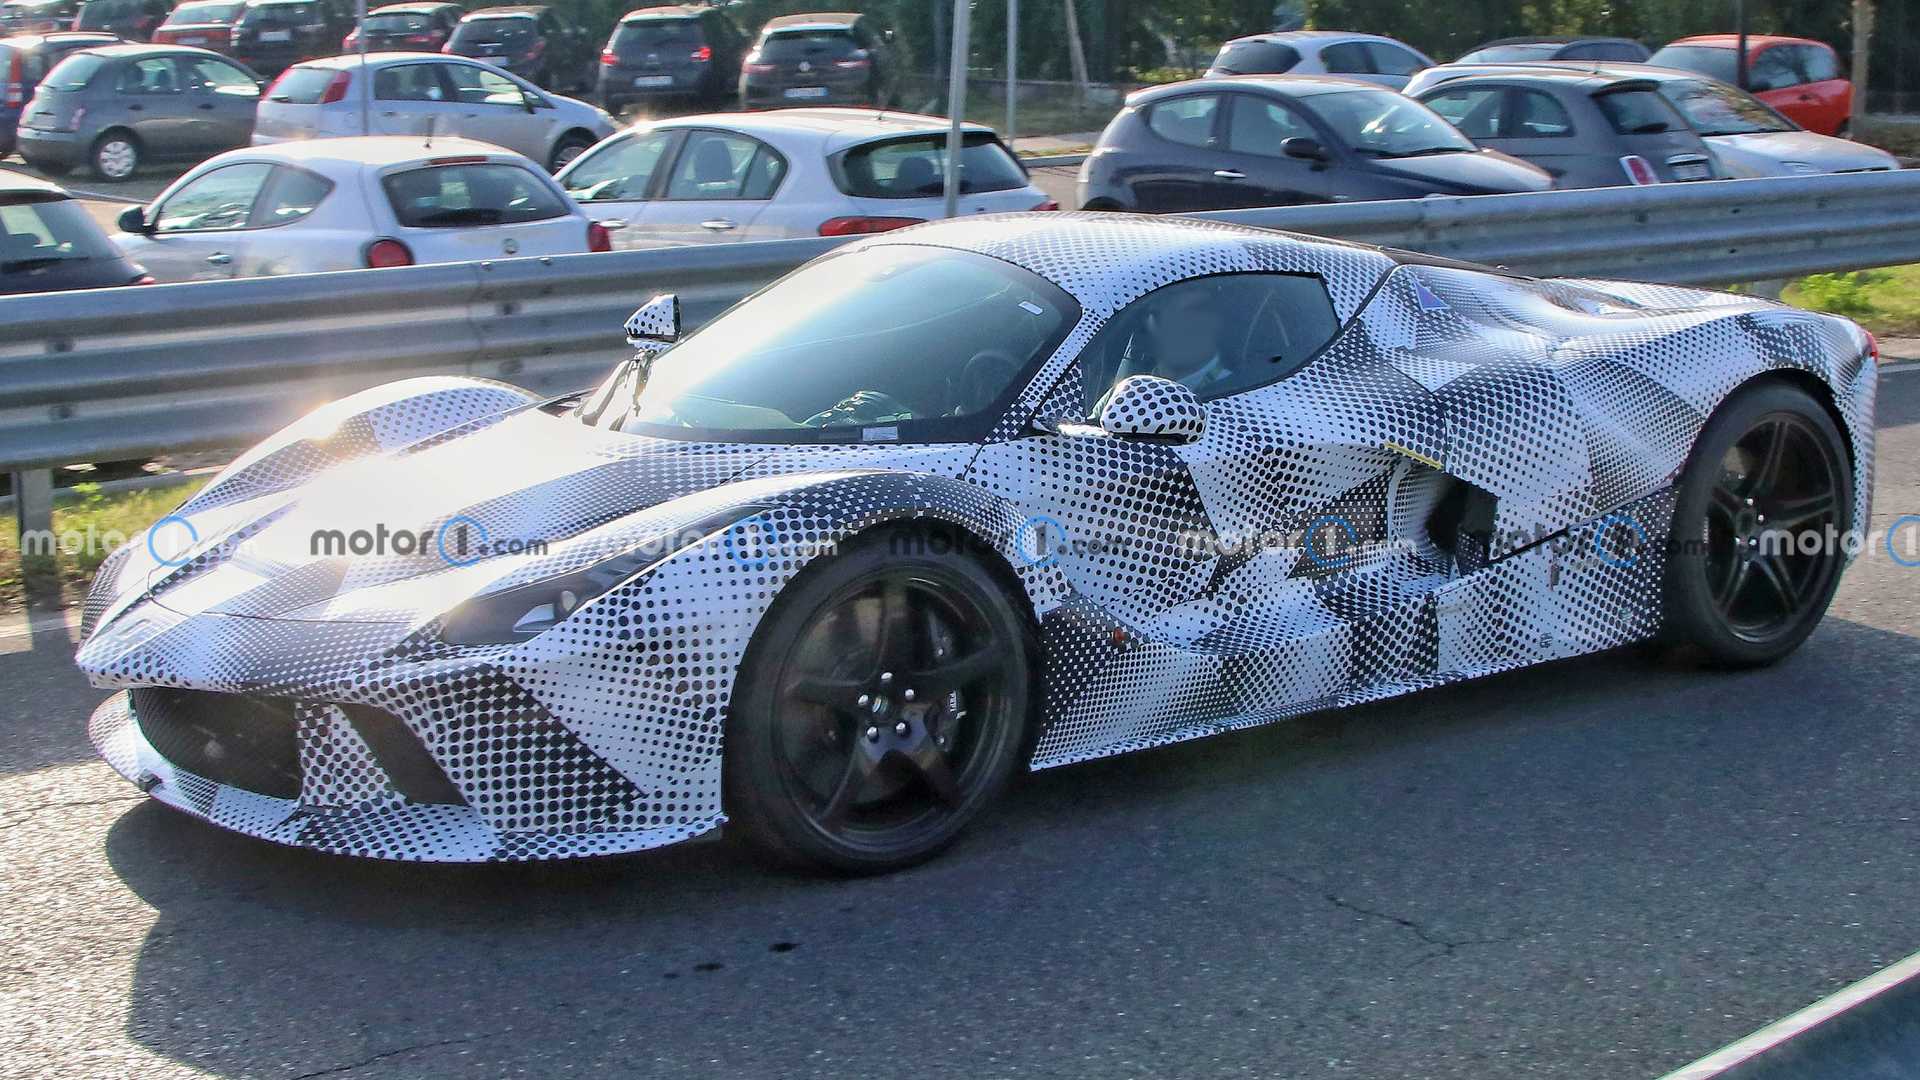 New Ferrari Hypercar Test Mule Spied Again, Up Close And Personal